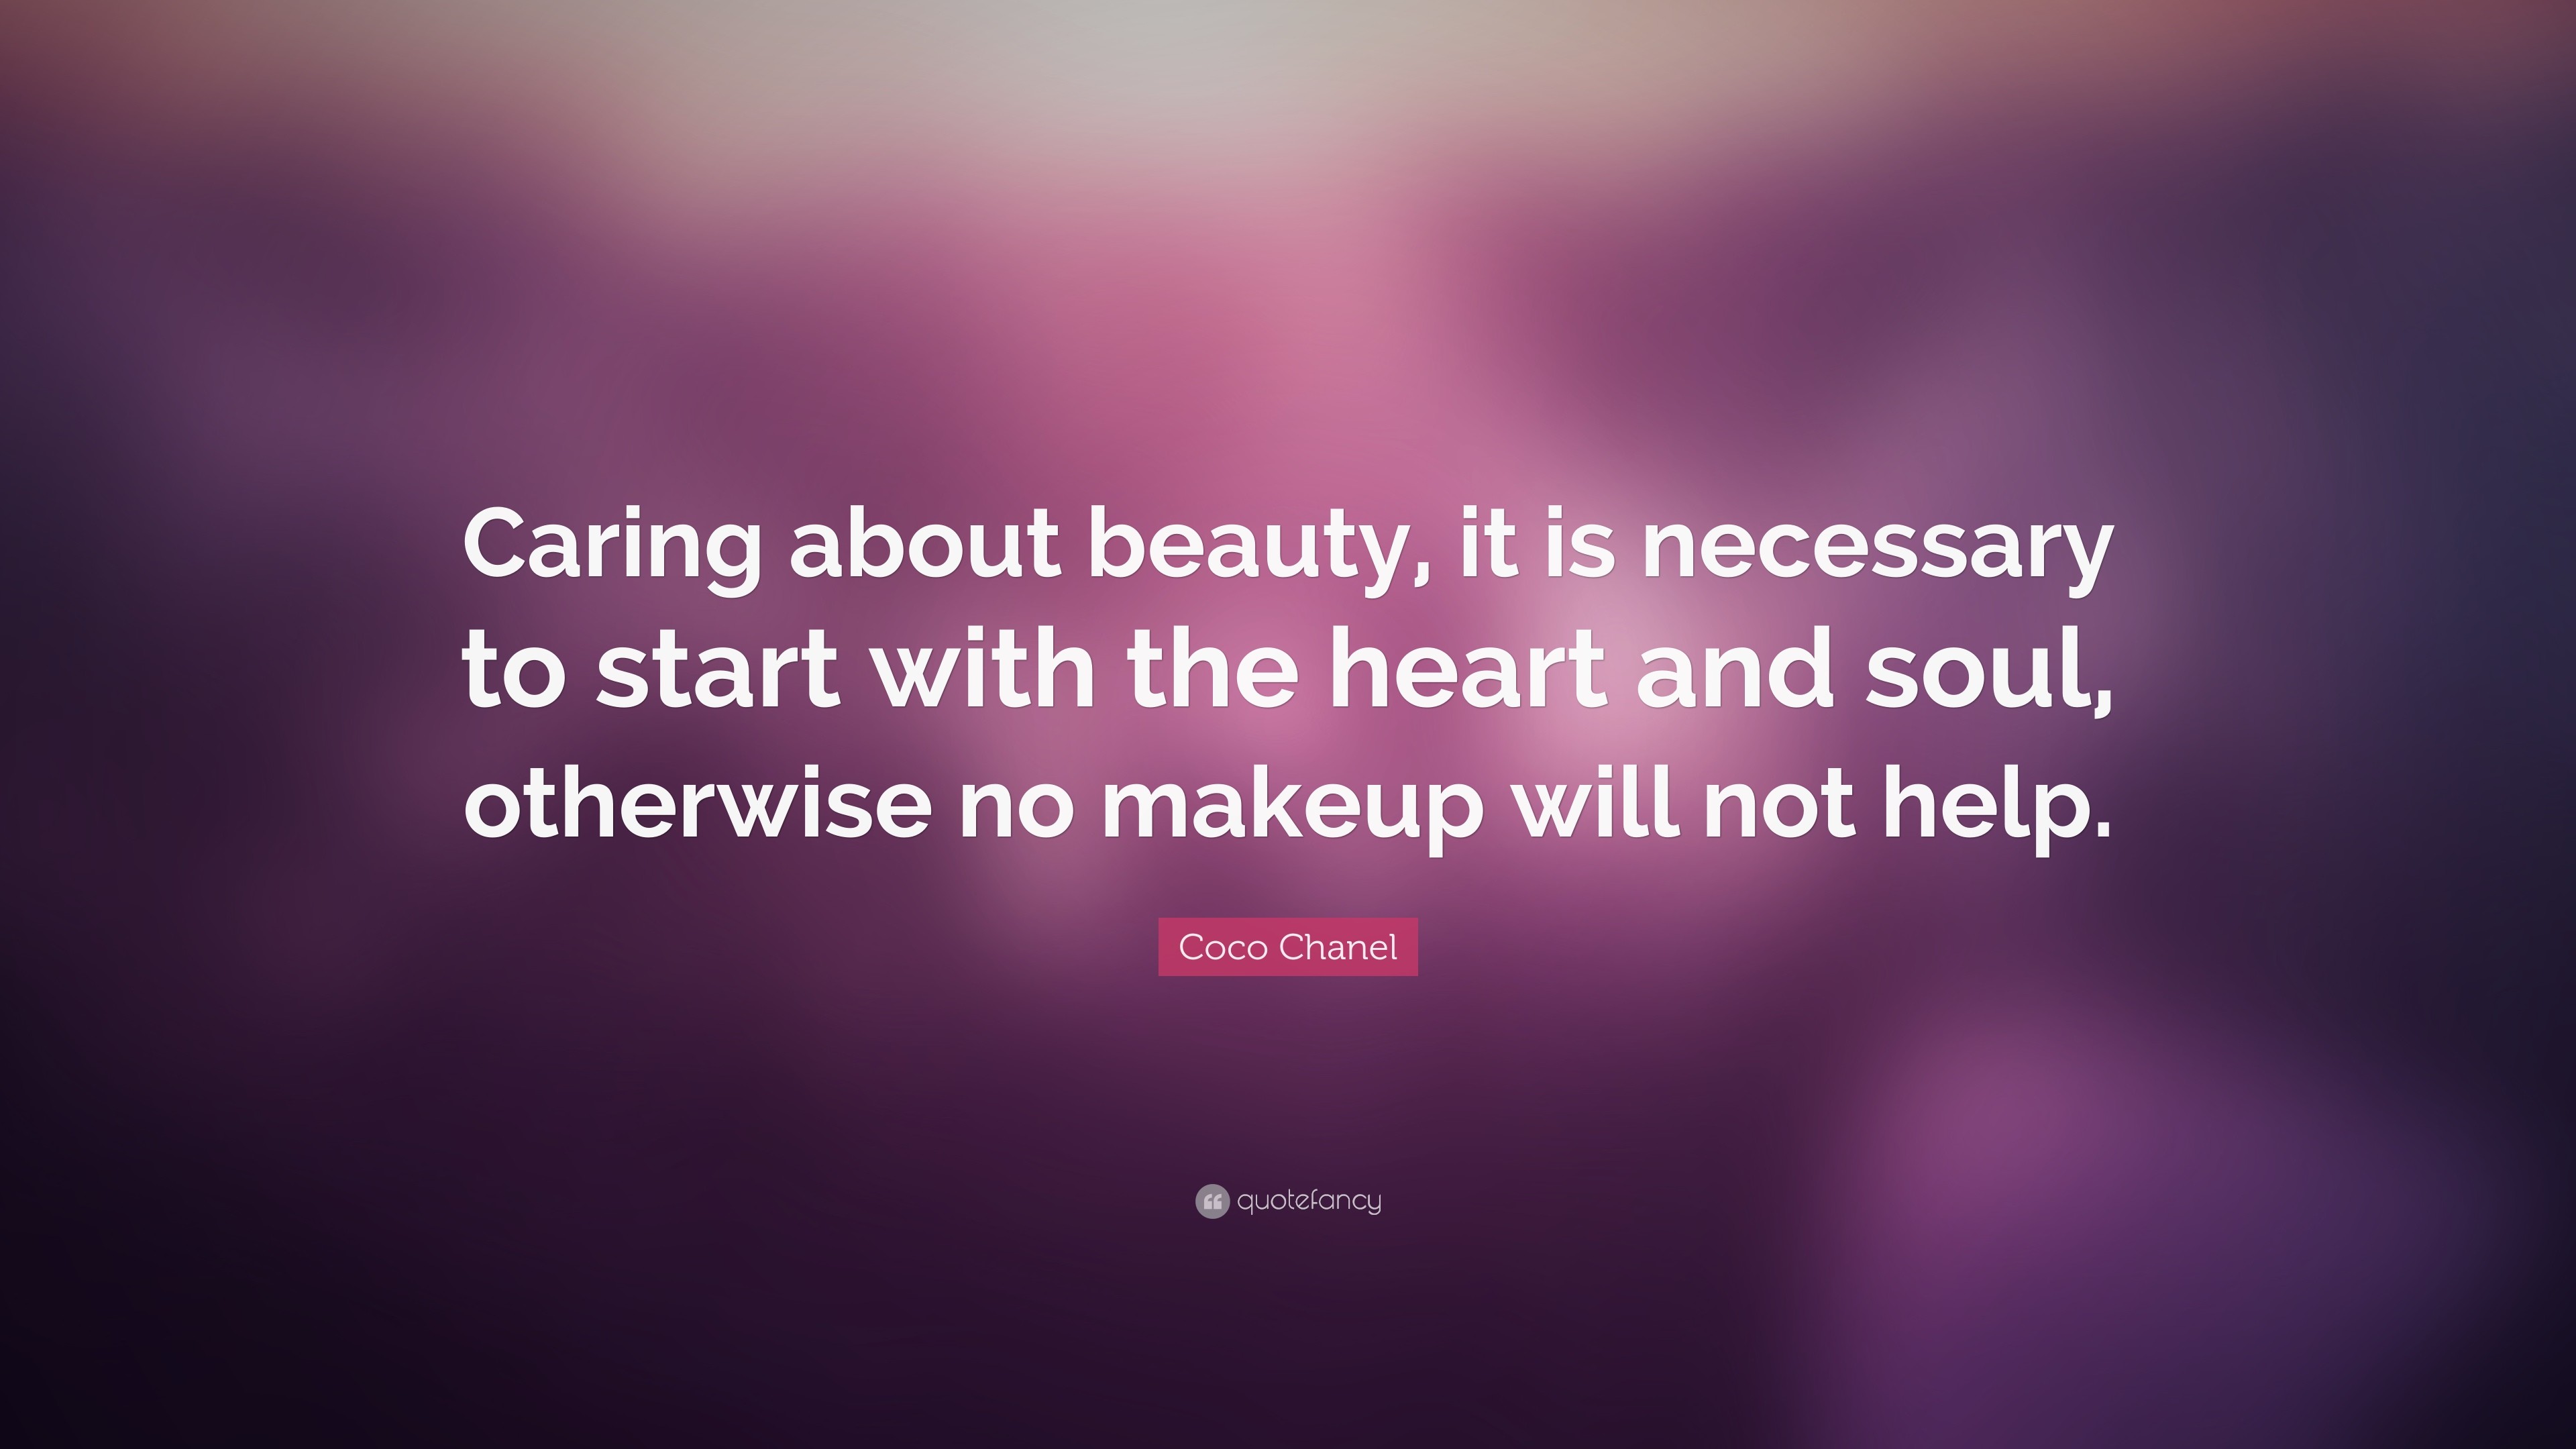 3840x2160 Coco Chanel Quote: “Caring about beauty, it is necessary to start with the